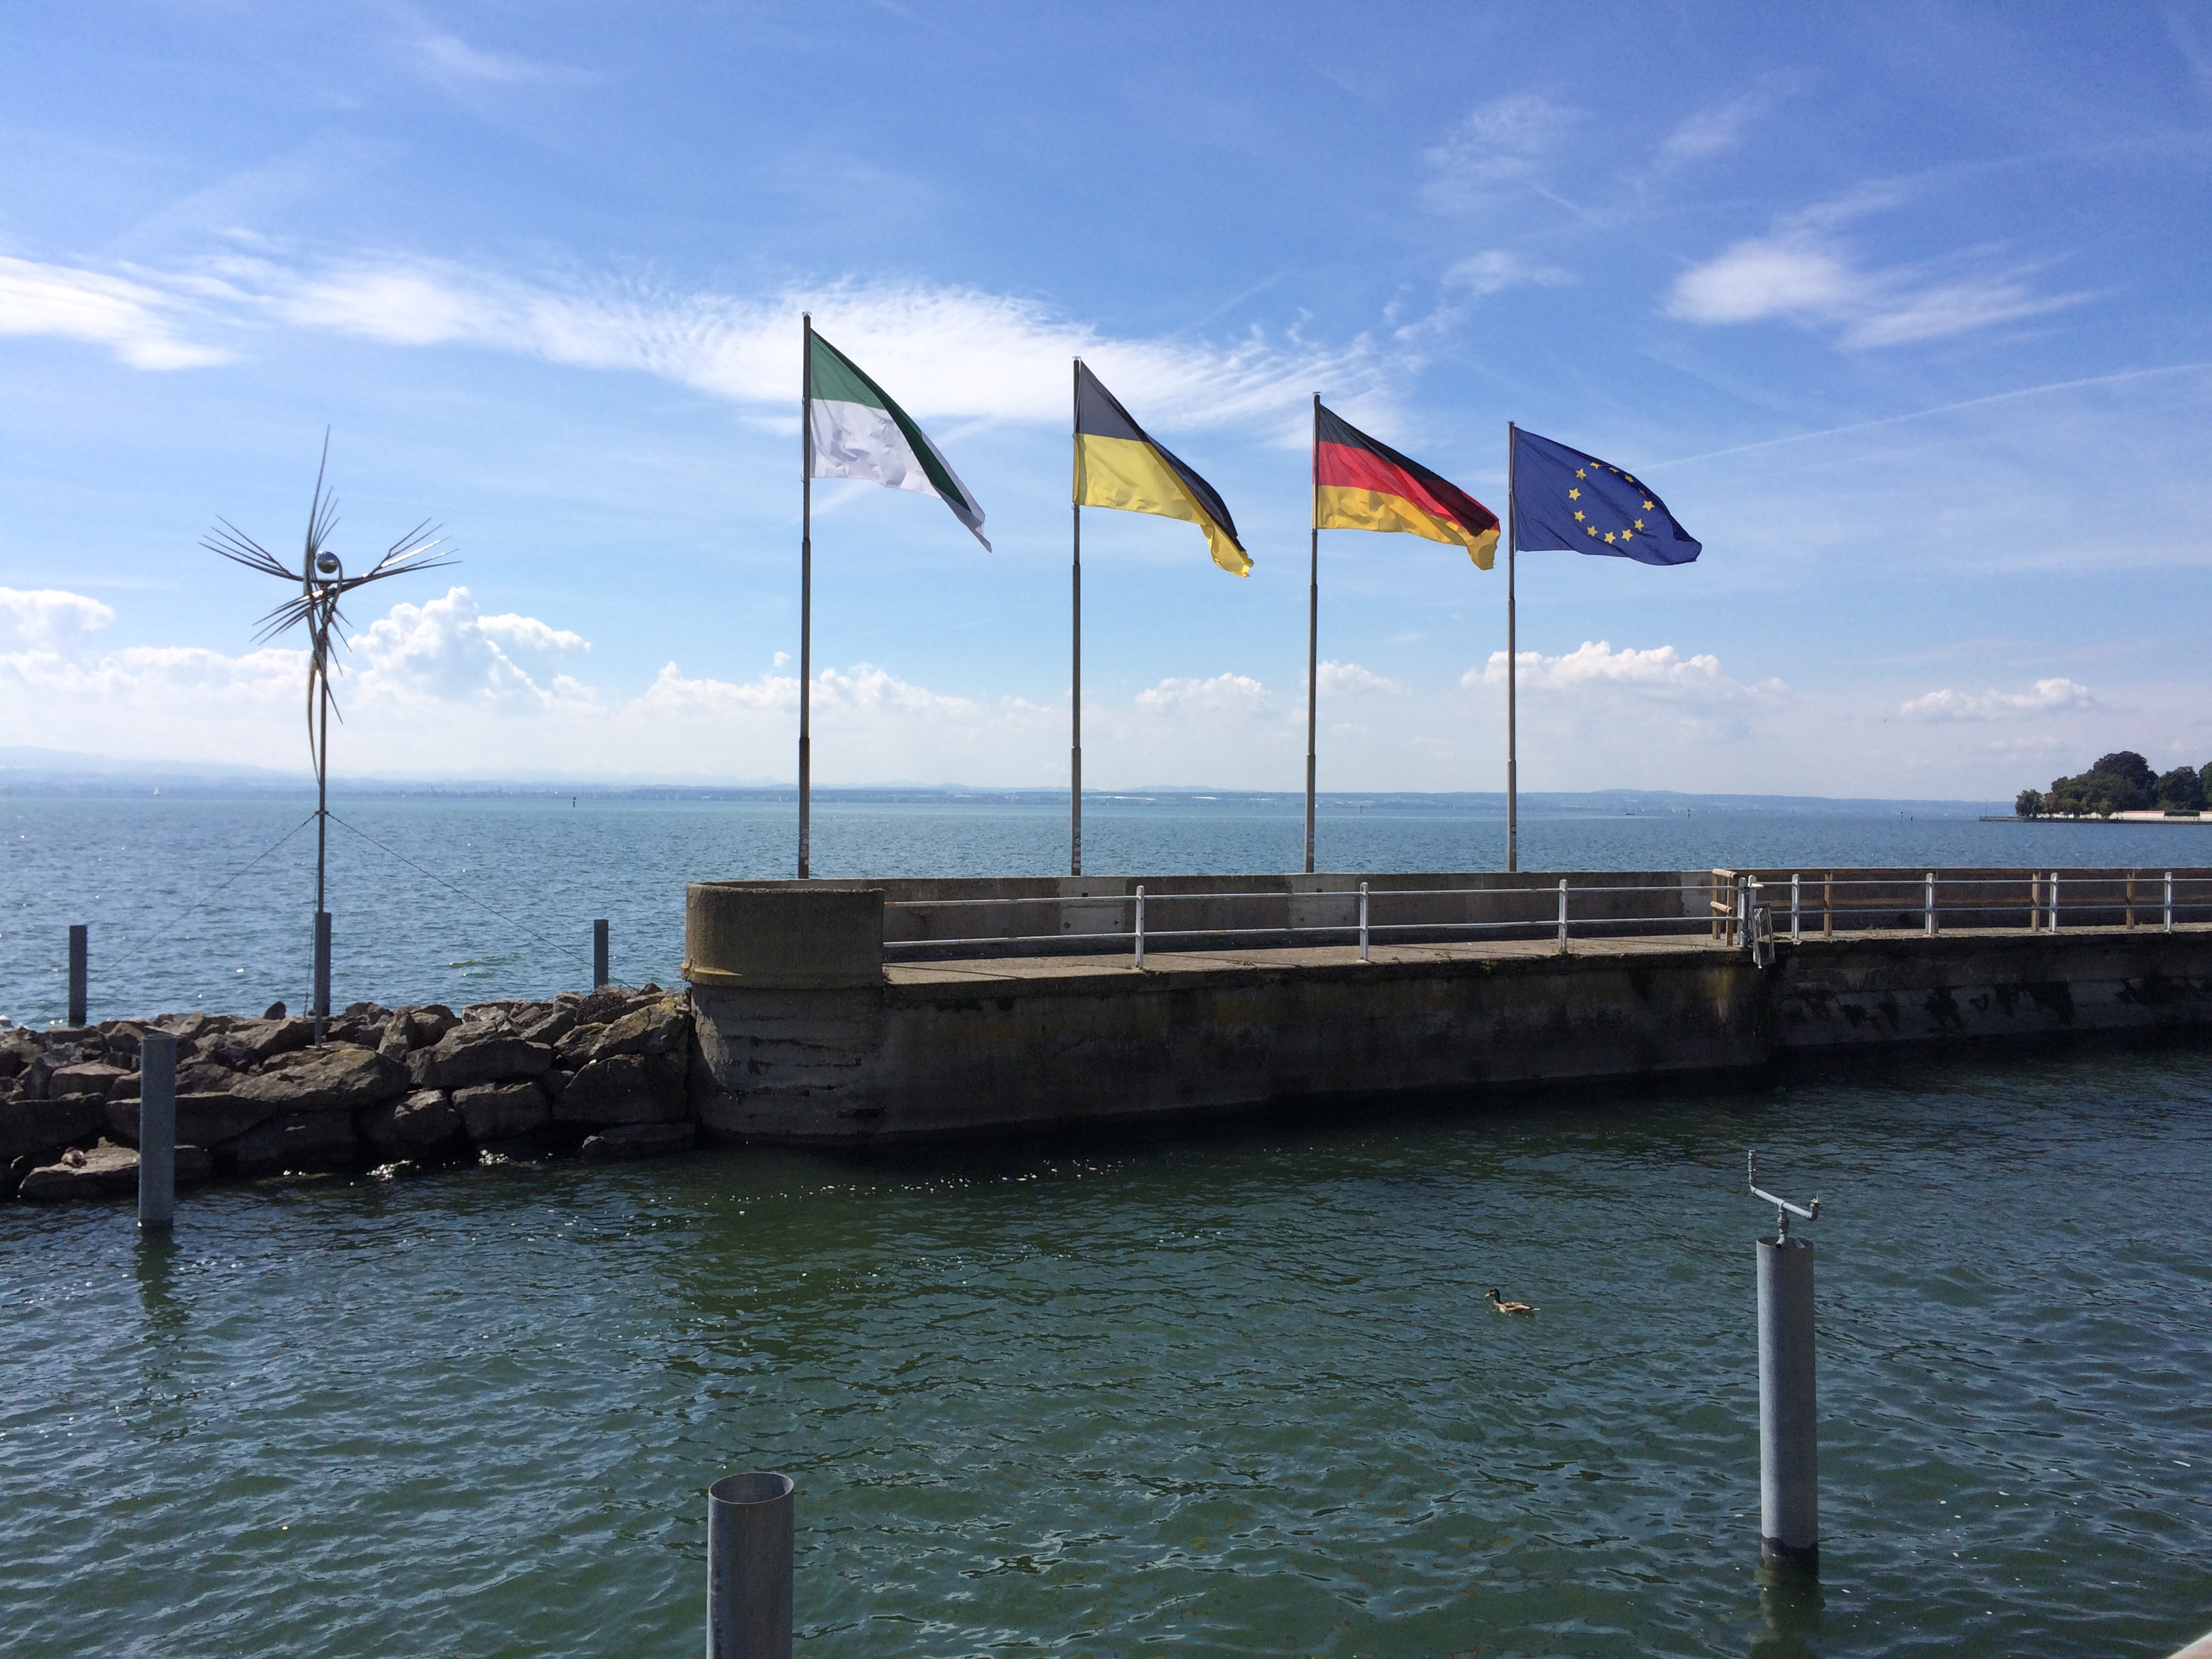 Flags flying over the bodensee, friedrichshafen, germany photo